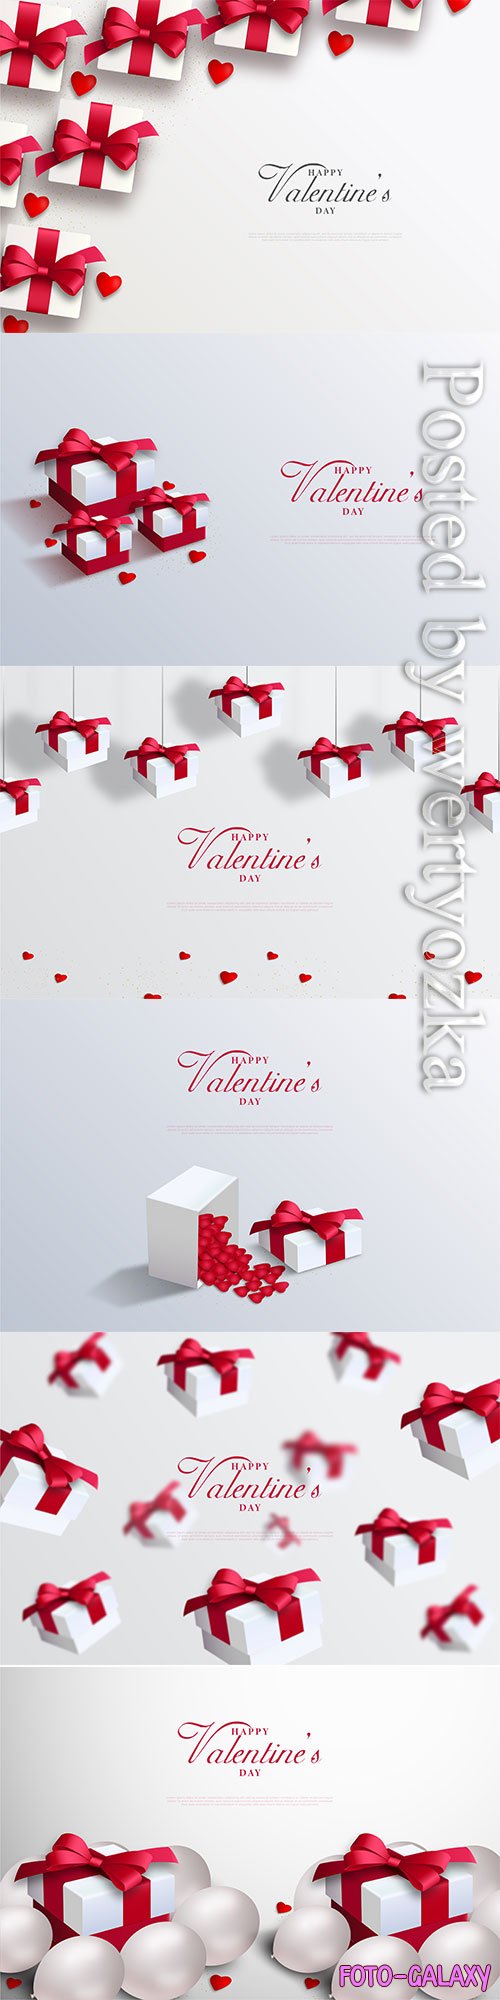 Valentine day vector card with love balloons and gift box